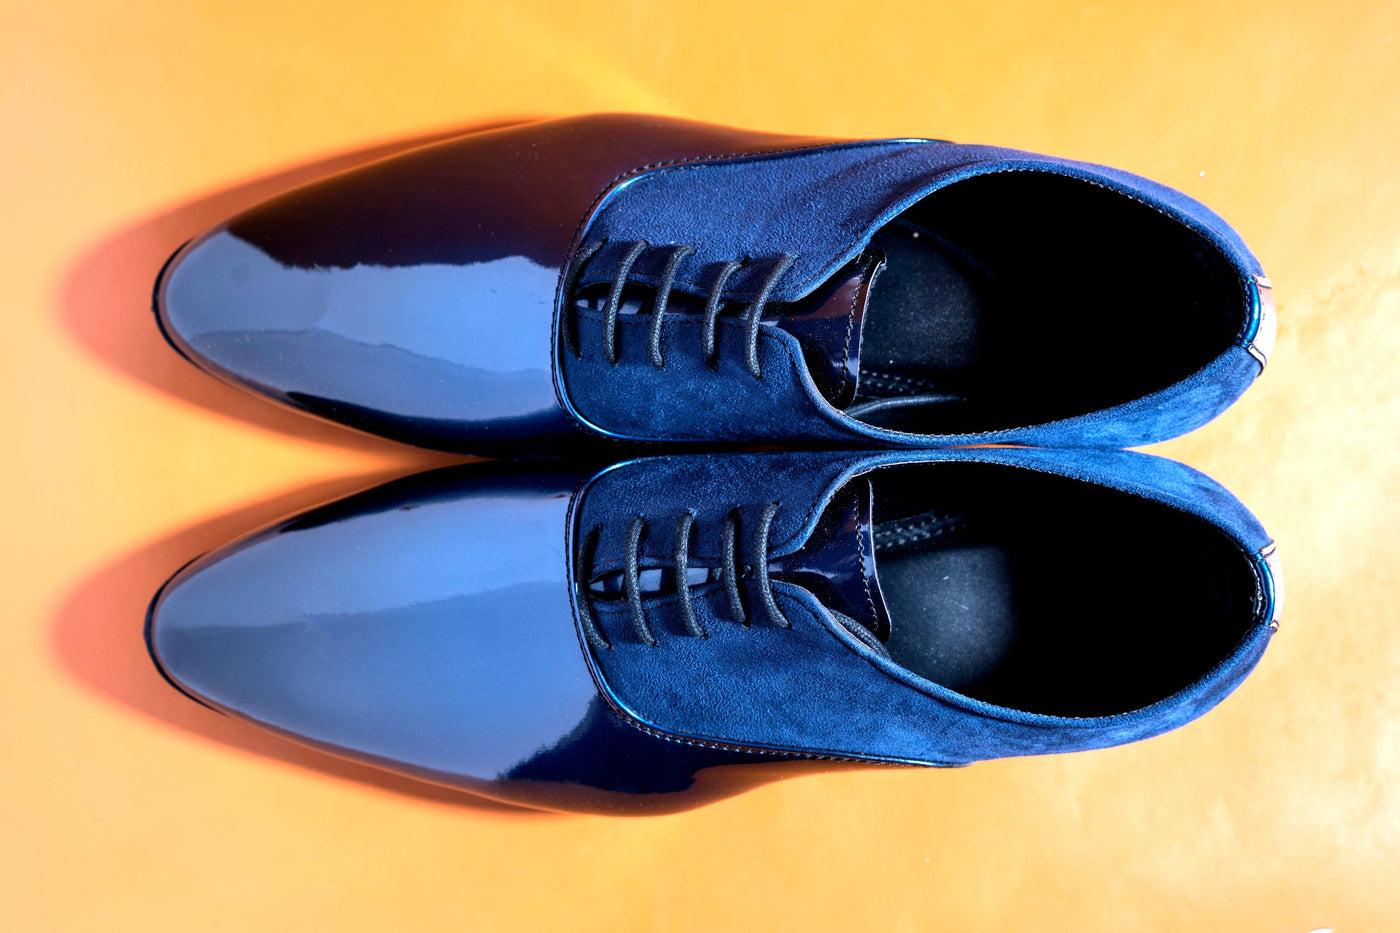 New Fashion Elegant And Classy Shiny Blue Formal Suede Shoes For Men-Unique and Classy